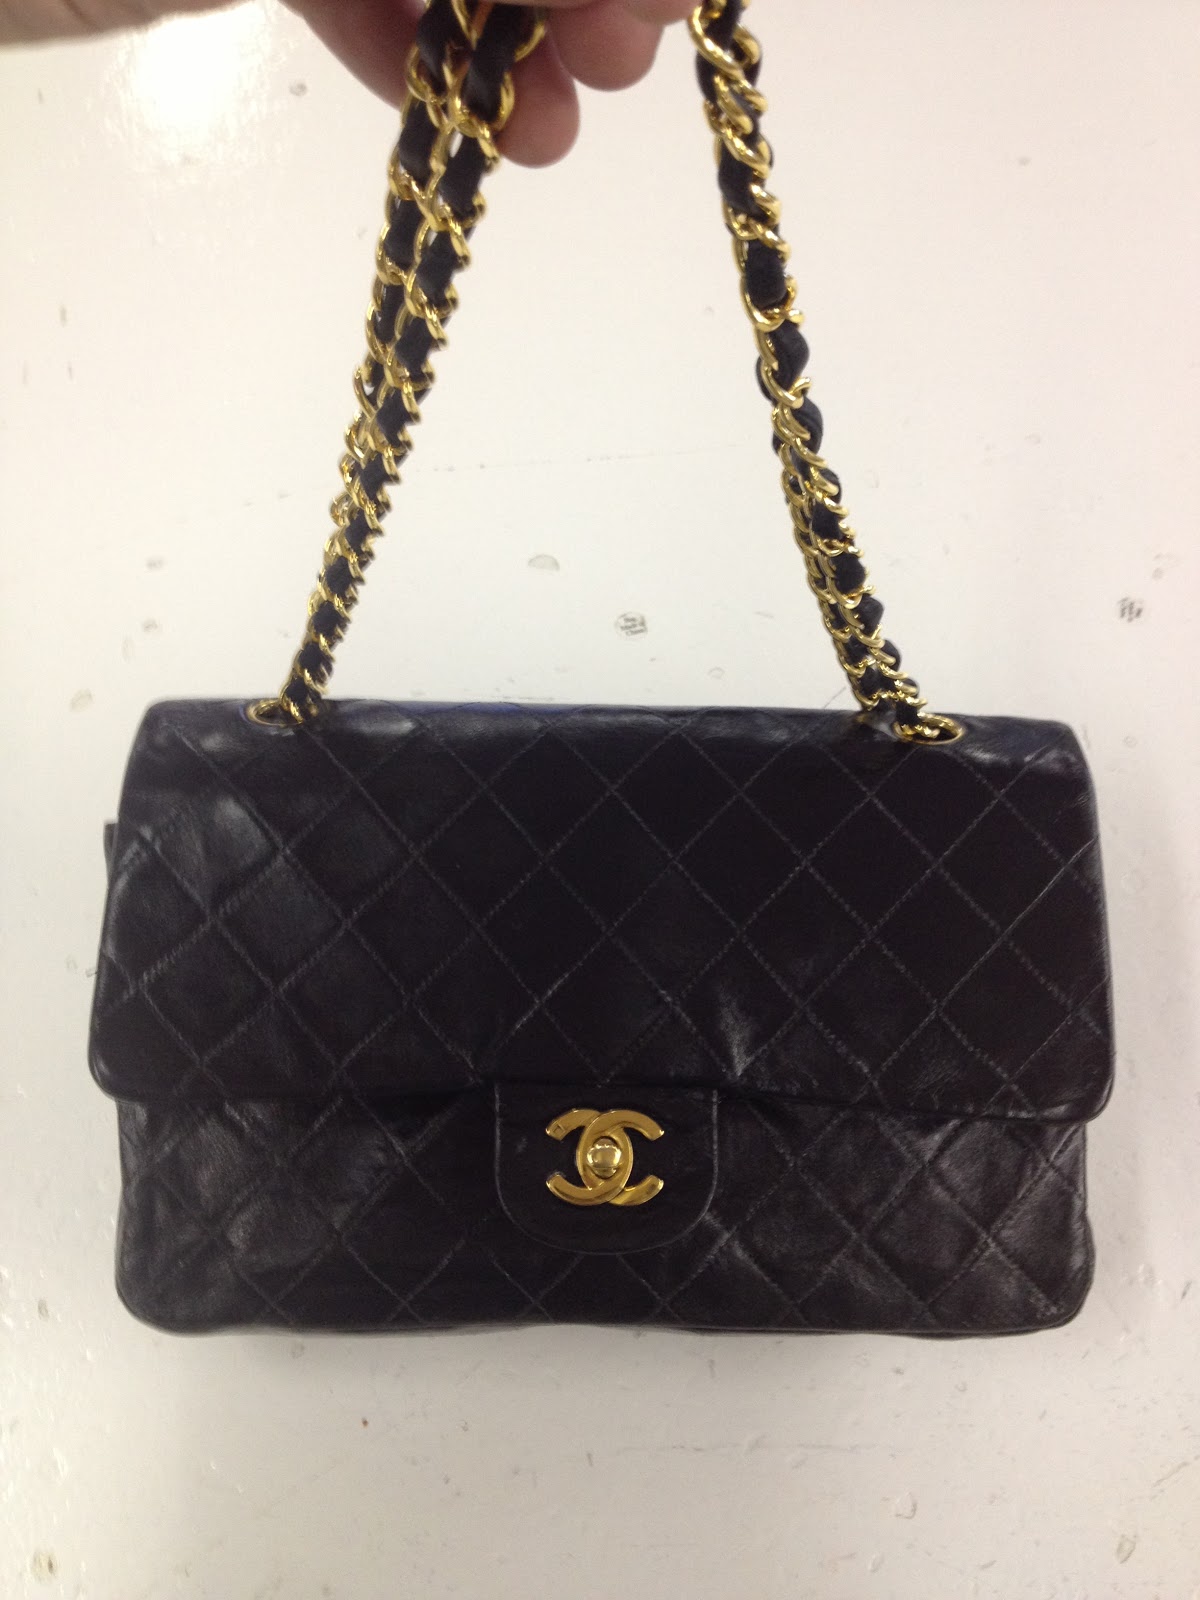 Leather Cleaning, Re-dyeing and Restoration: White Chanel Purse Dyed Black